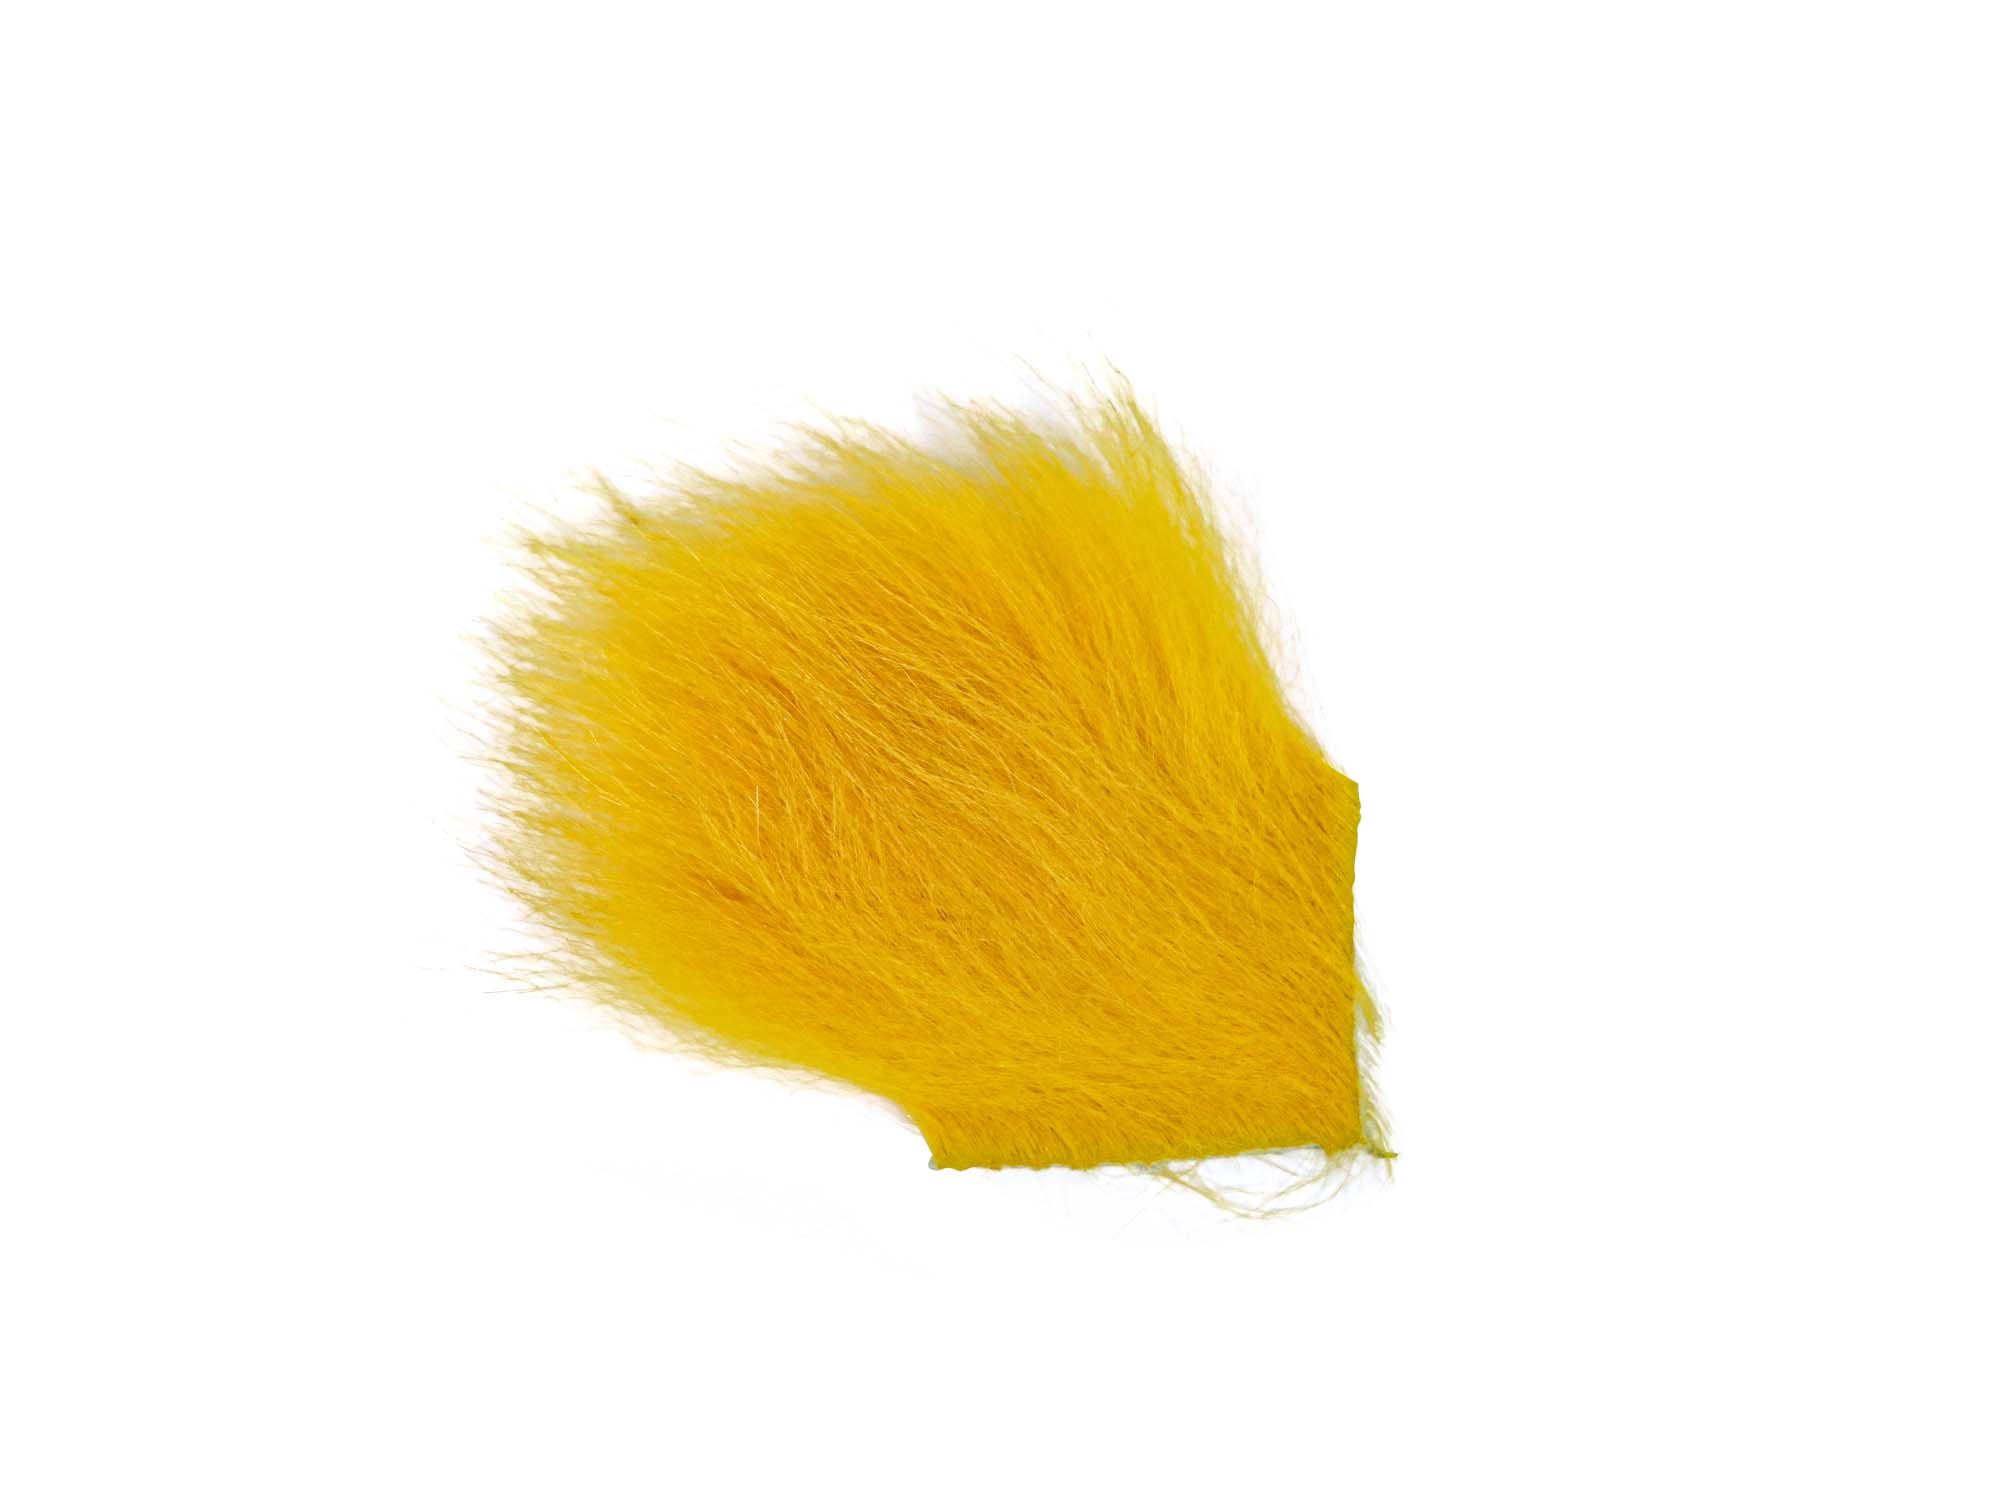 Dyed Arctic Runner Fly Fishing Piece: Yellow - 1377-YL-AS (9UL4)